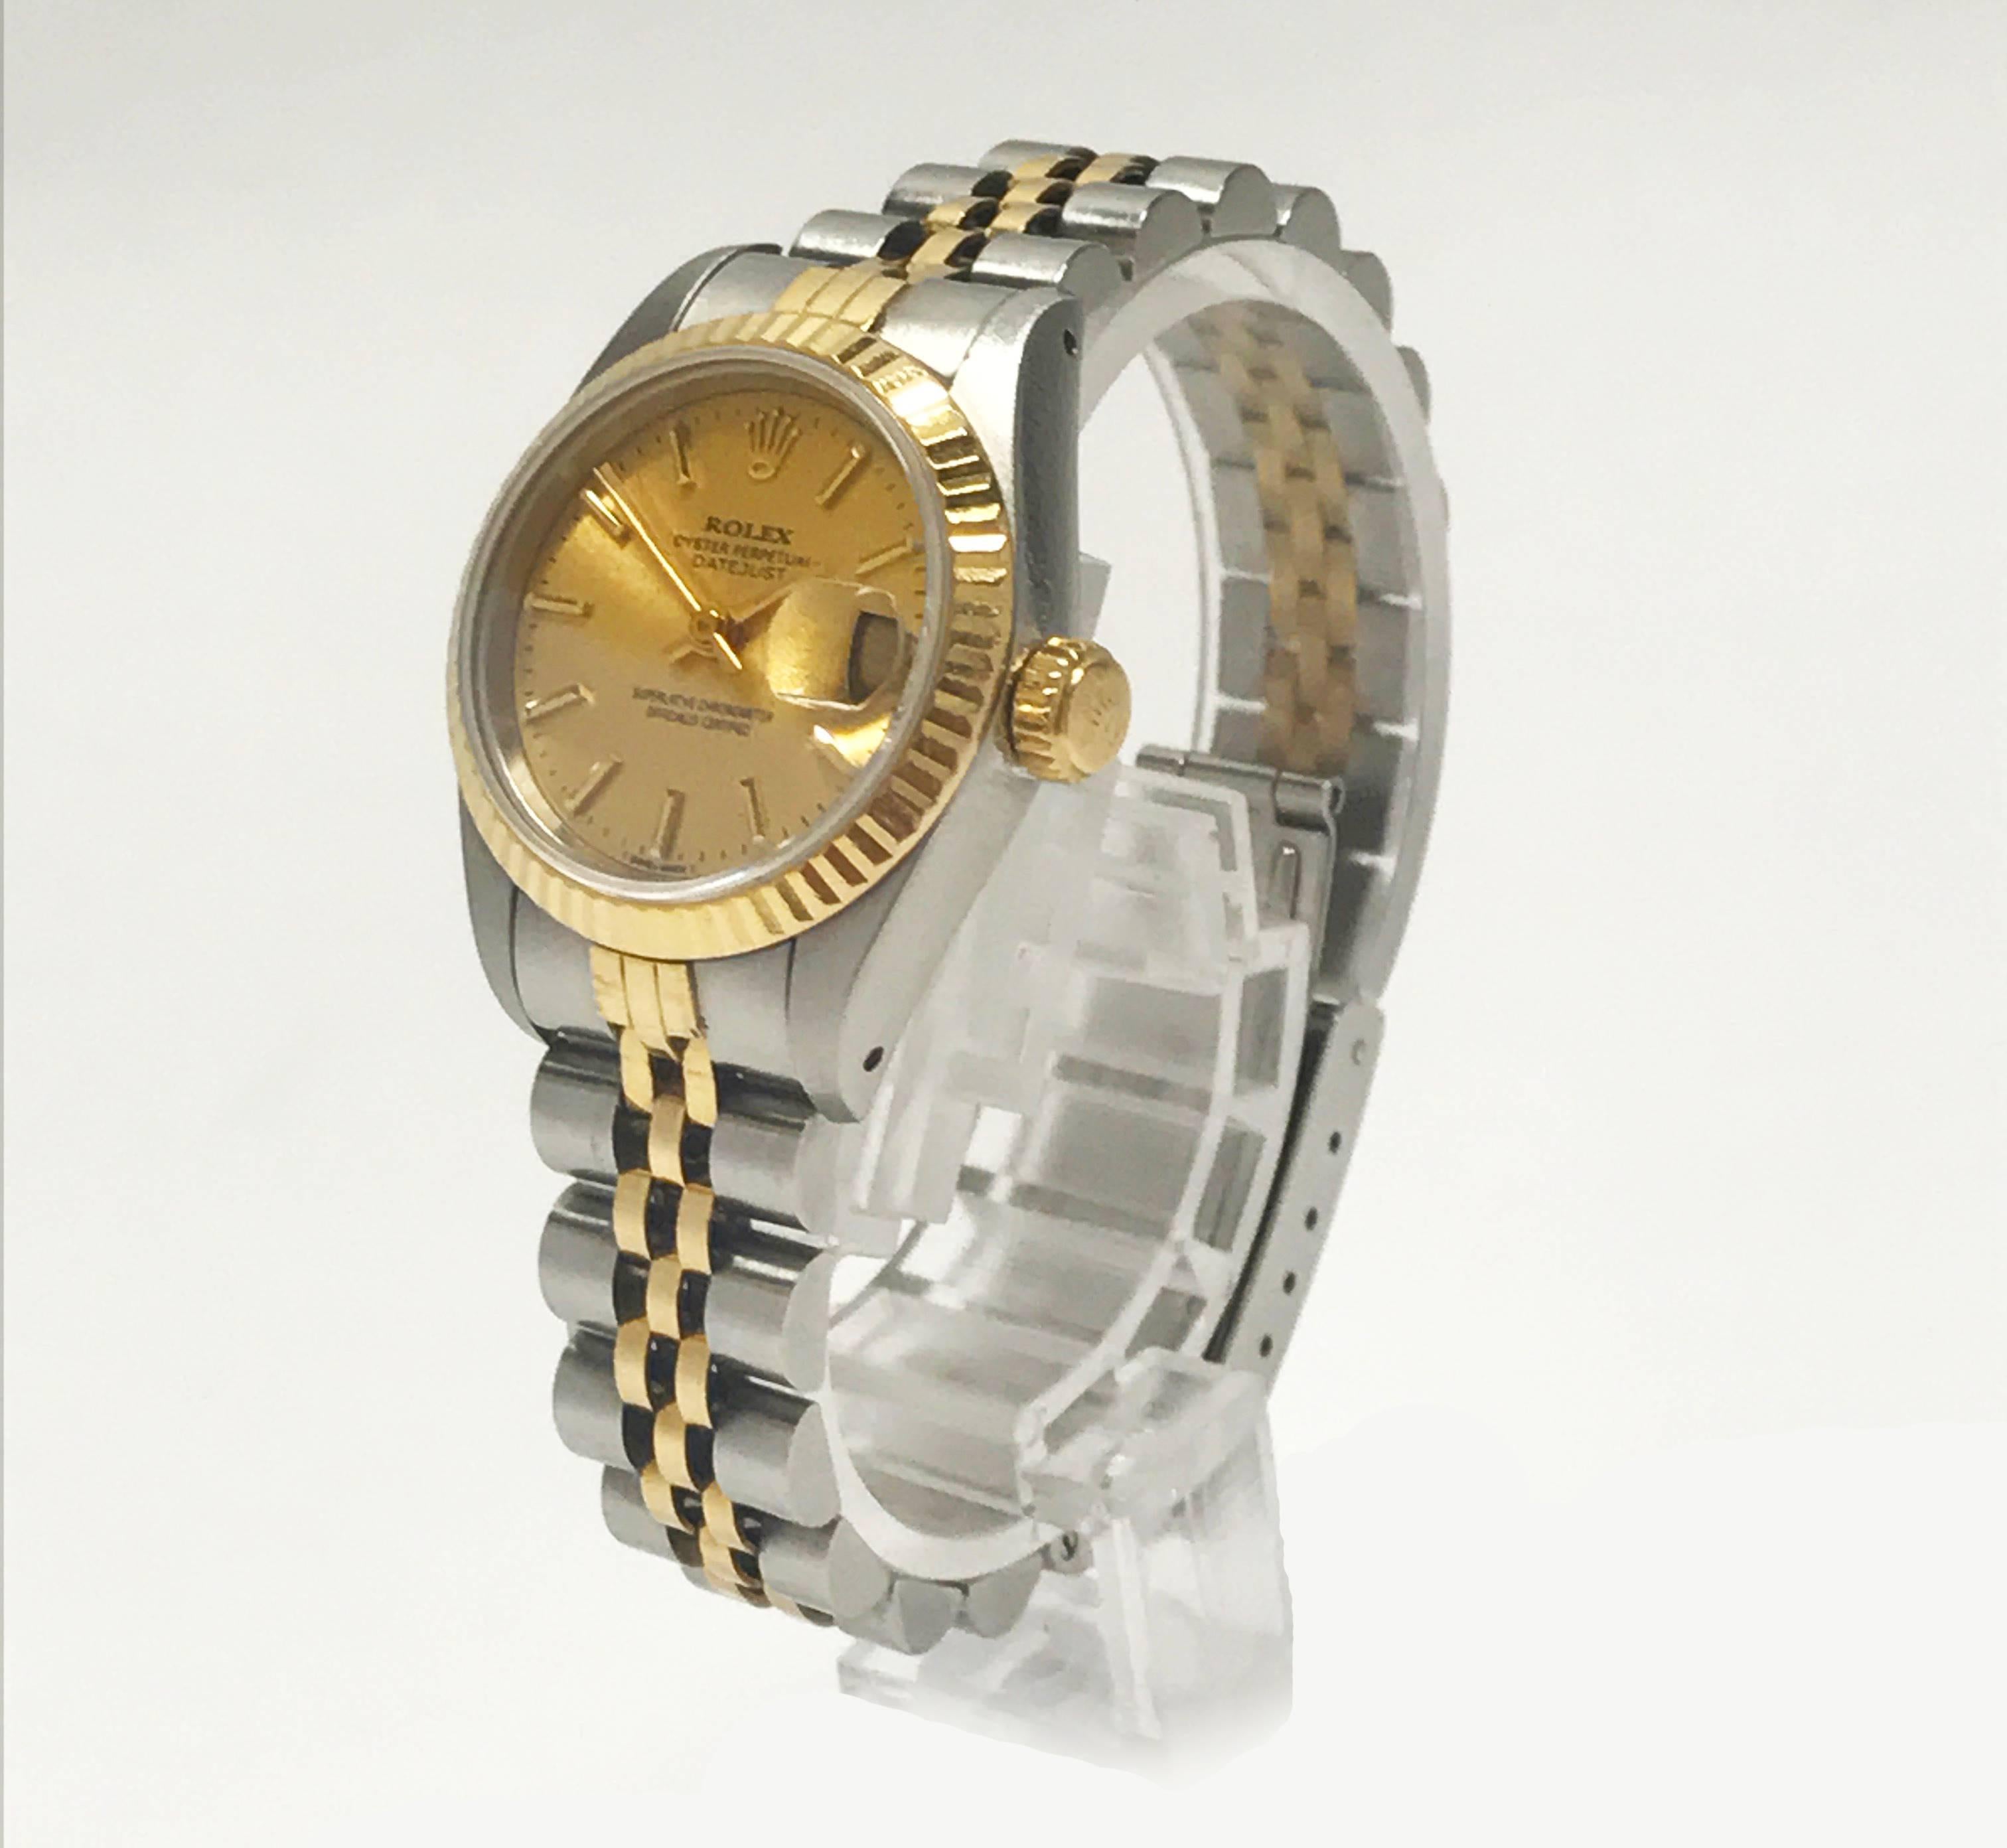 A beautiful ladies estate watch made by Rolex and produced in the 1980's. A timeless and iconic DateJust featuring a two-tone stainless and 18K yellow design. It has a fluted bezel, champagne gold dial, and adjustable jubilee bracelet. Case diameter